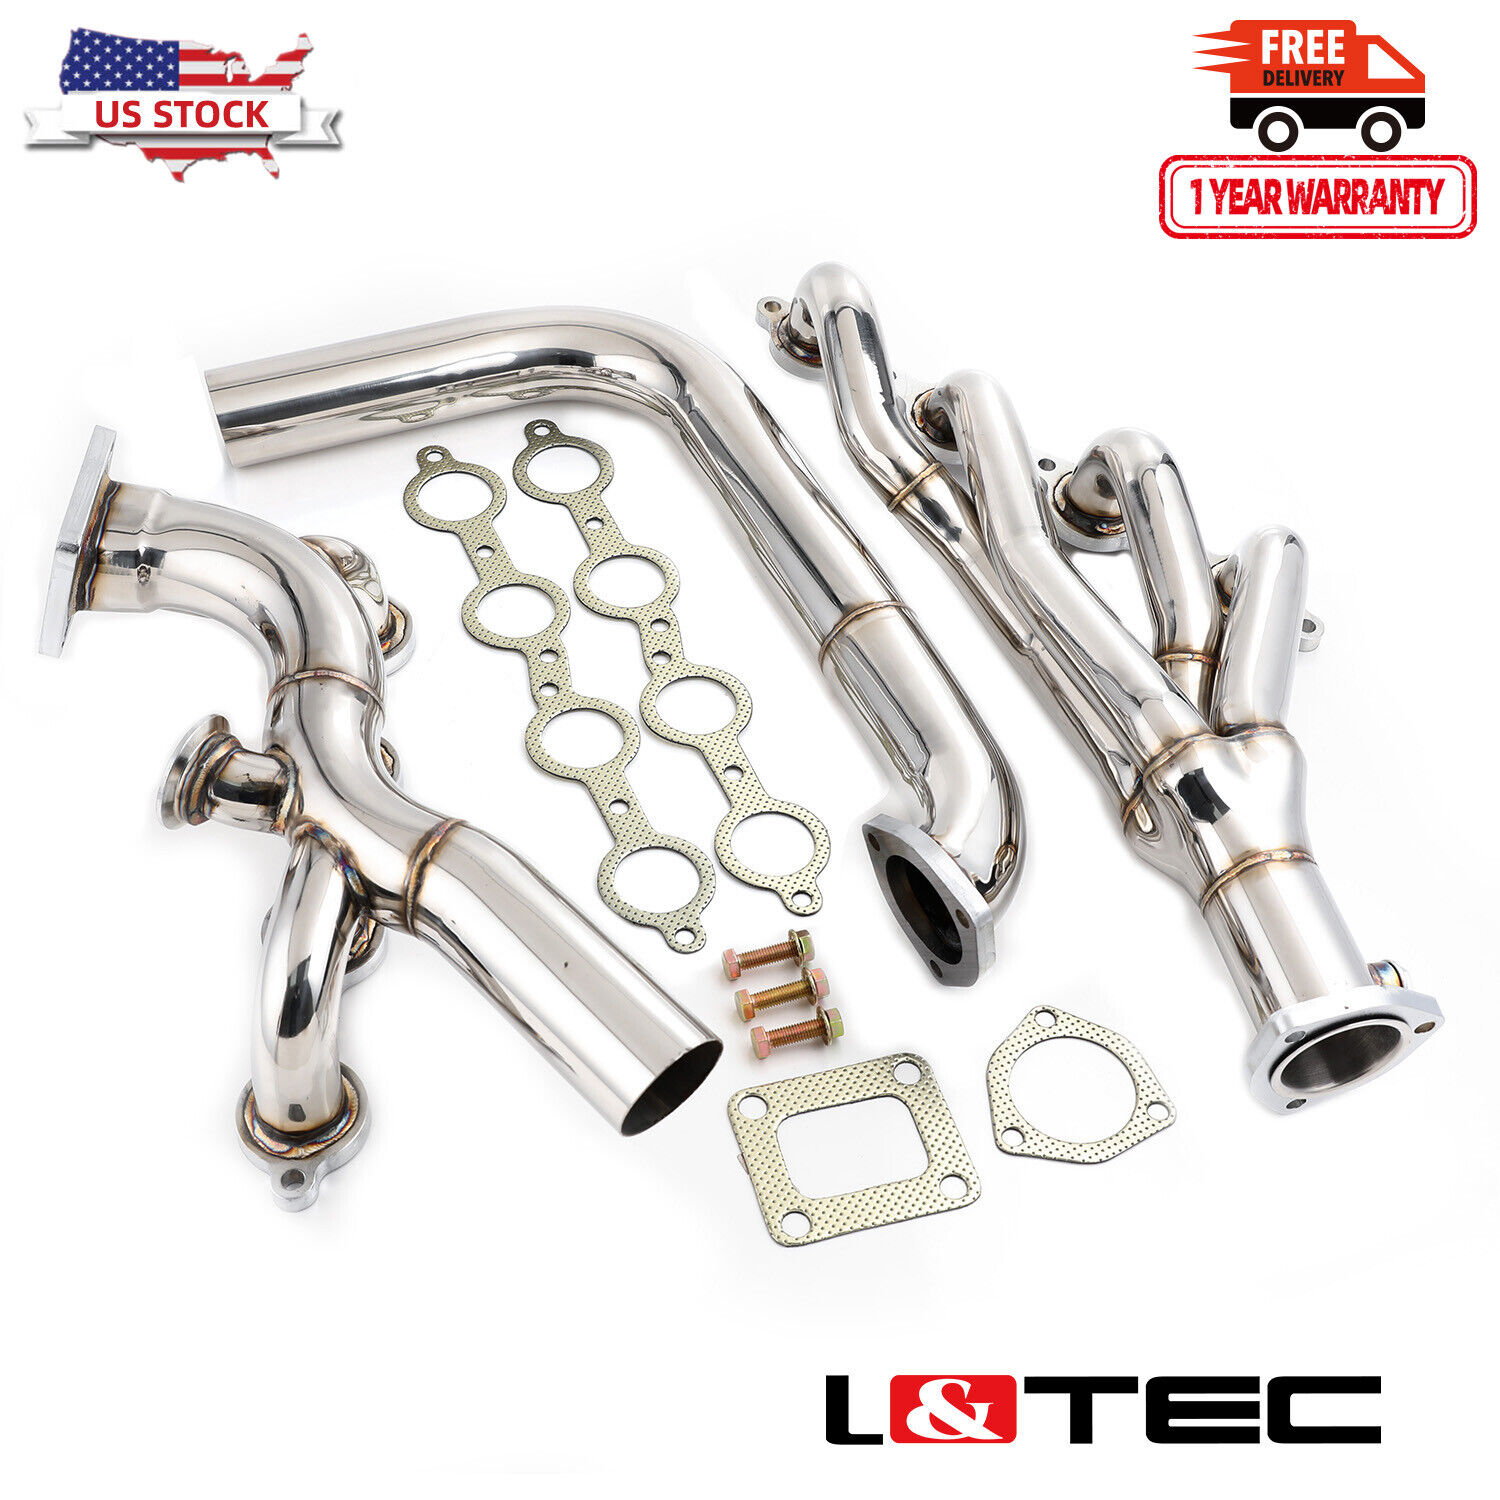 L&TEC Single Turbo Headers for LSX LS2 T4 Top Mount Swap Crossover with 44mm WG